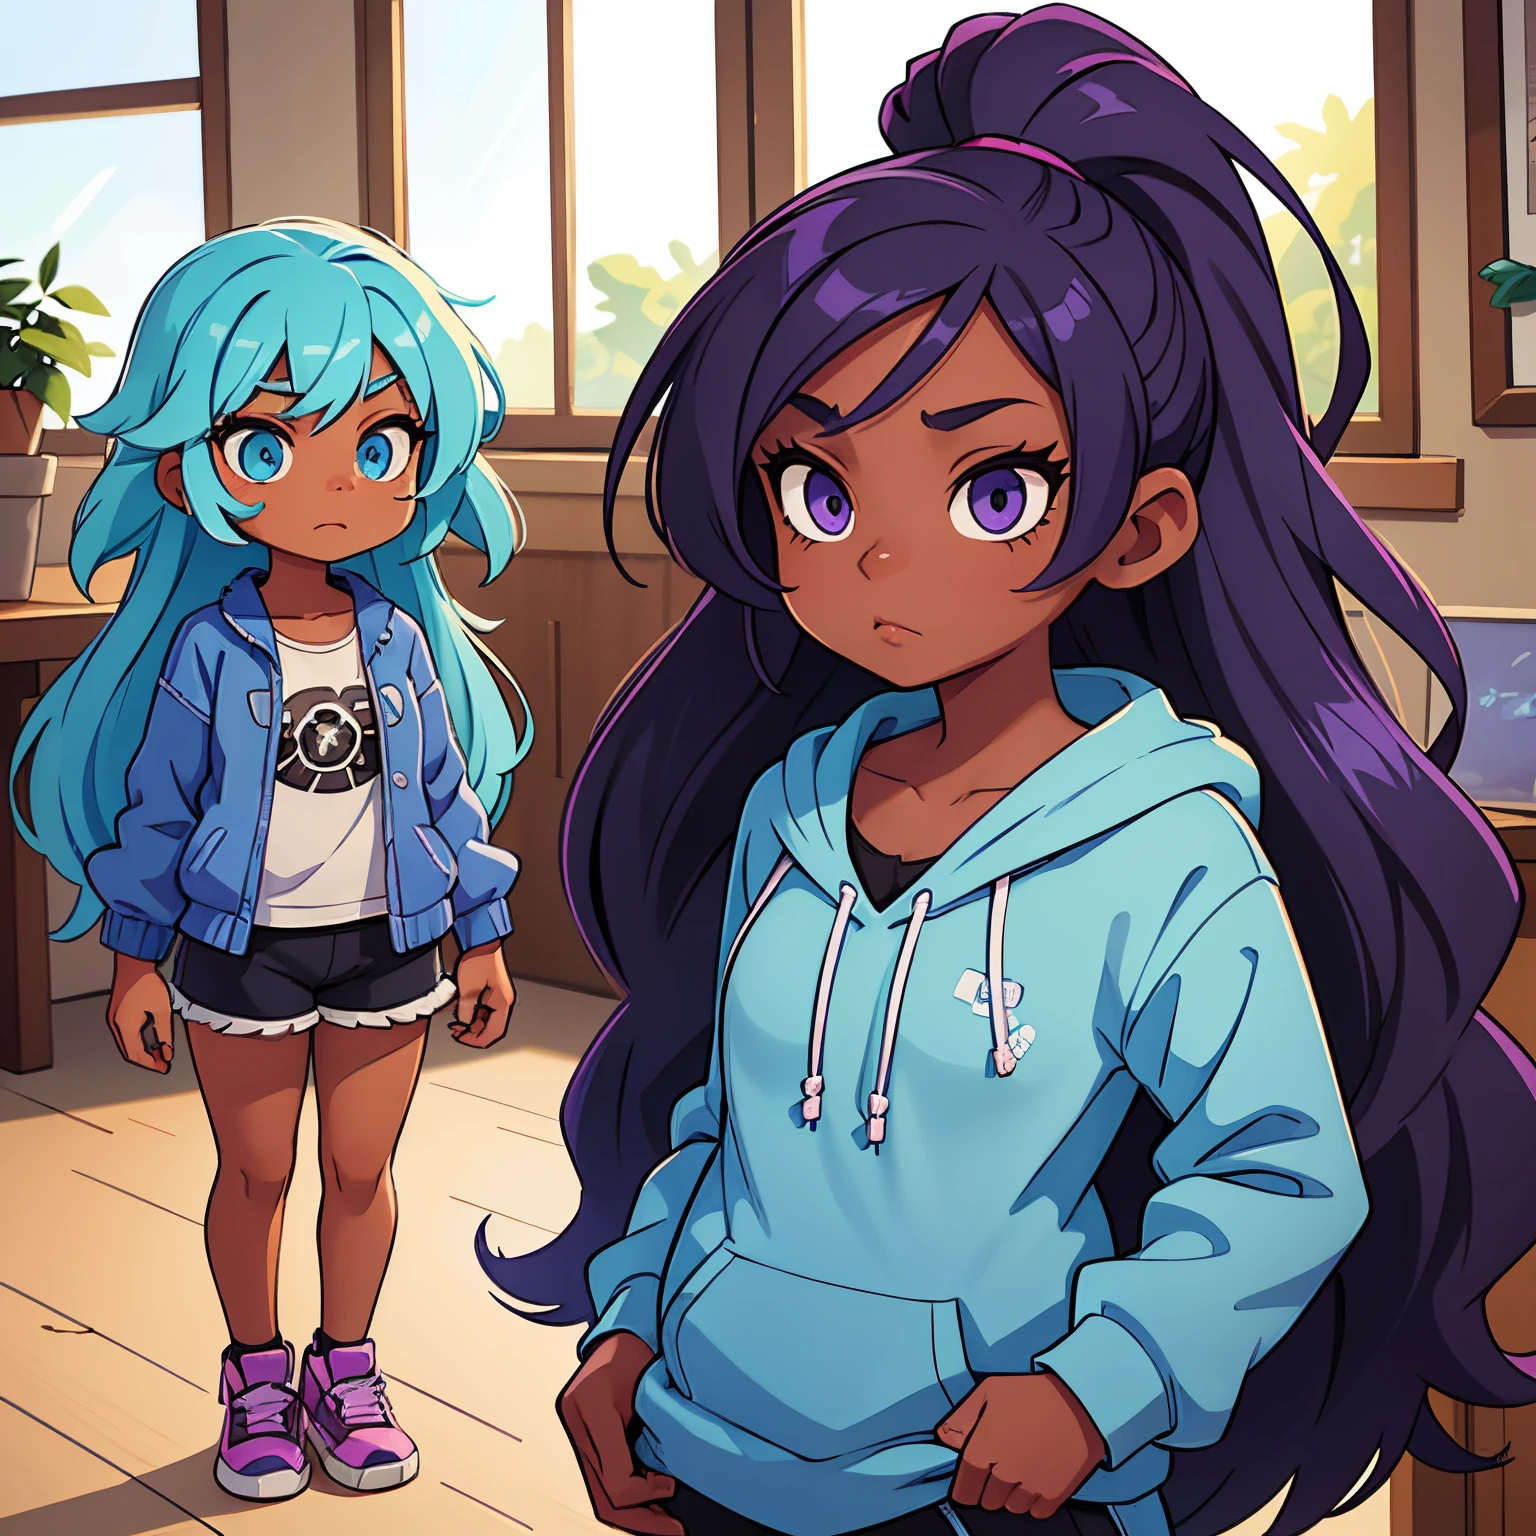 2 black girls with, long light blue hair and eyes, and purple hair and eyes,casual clothes,black skinned girls